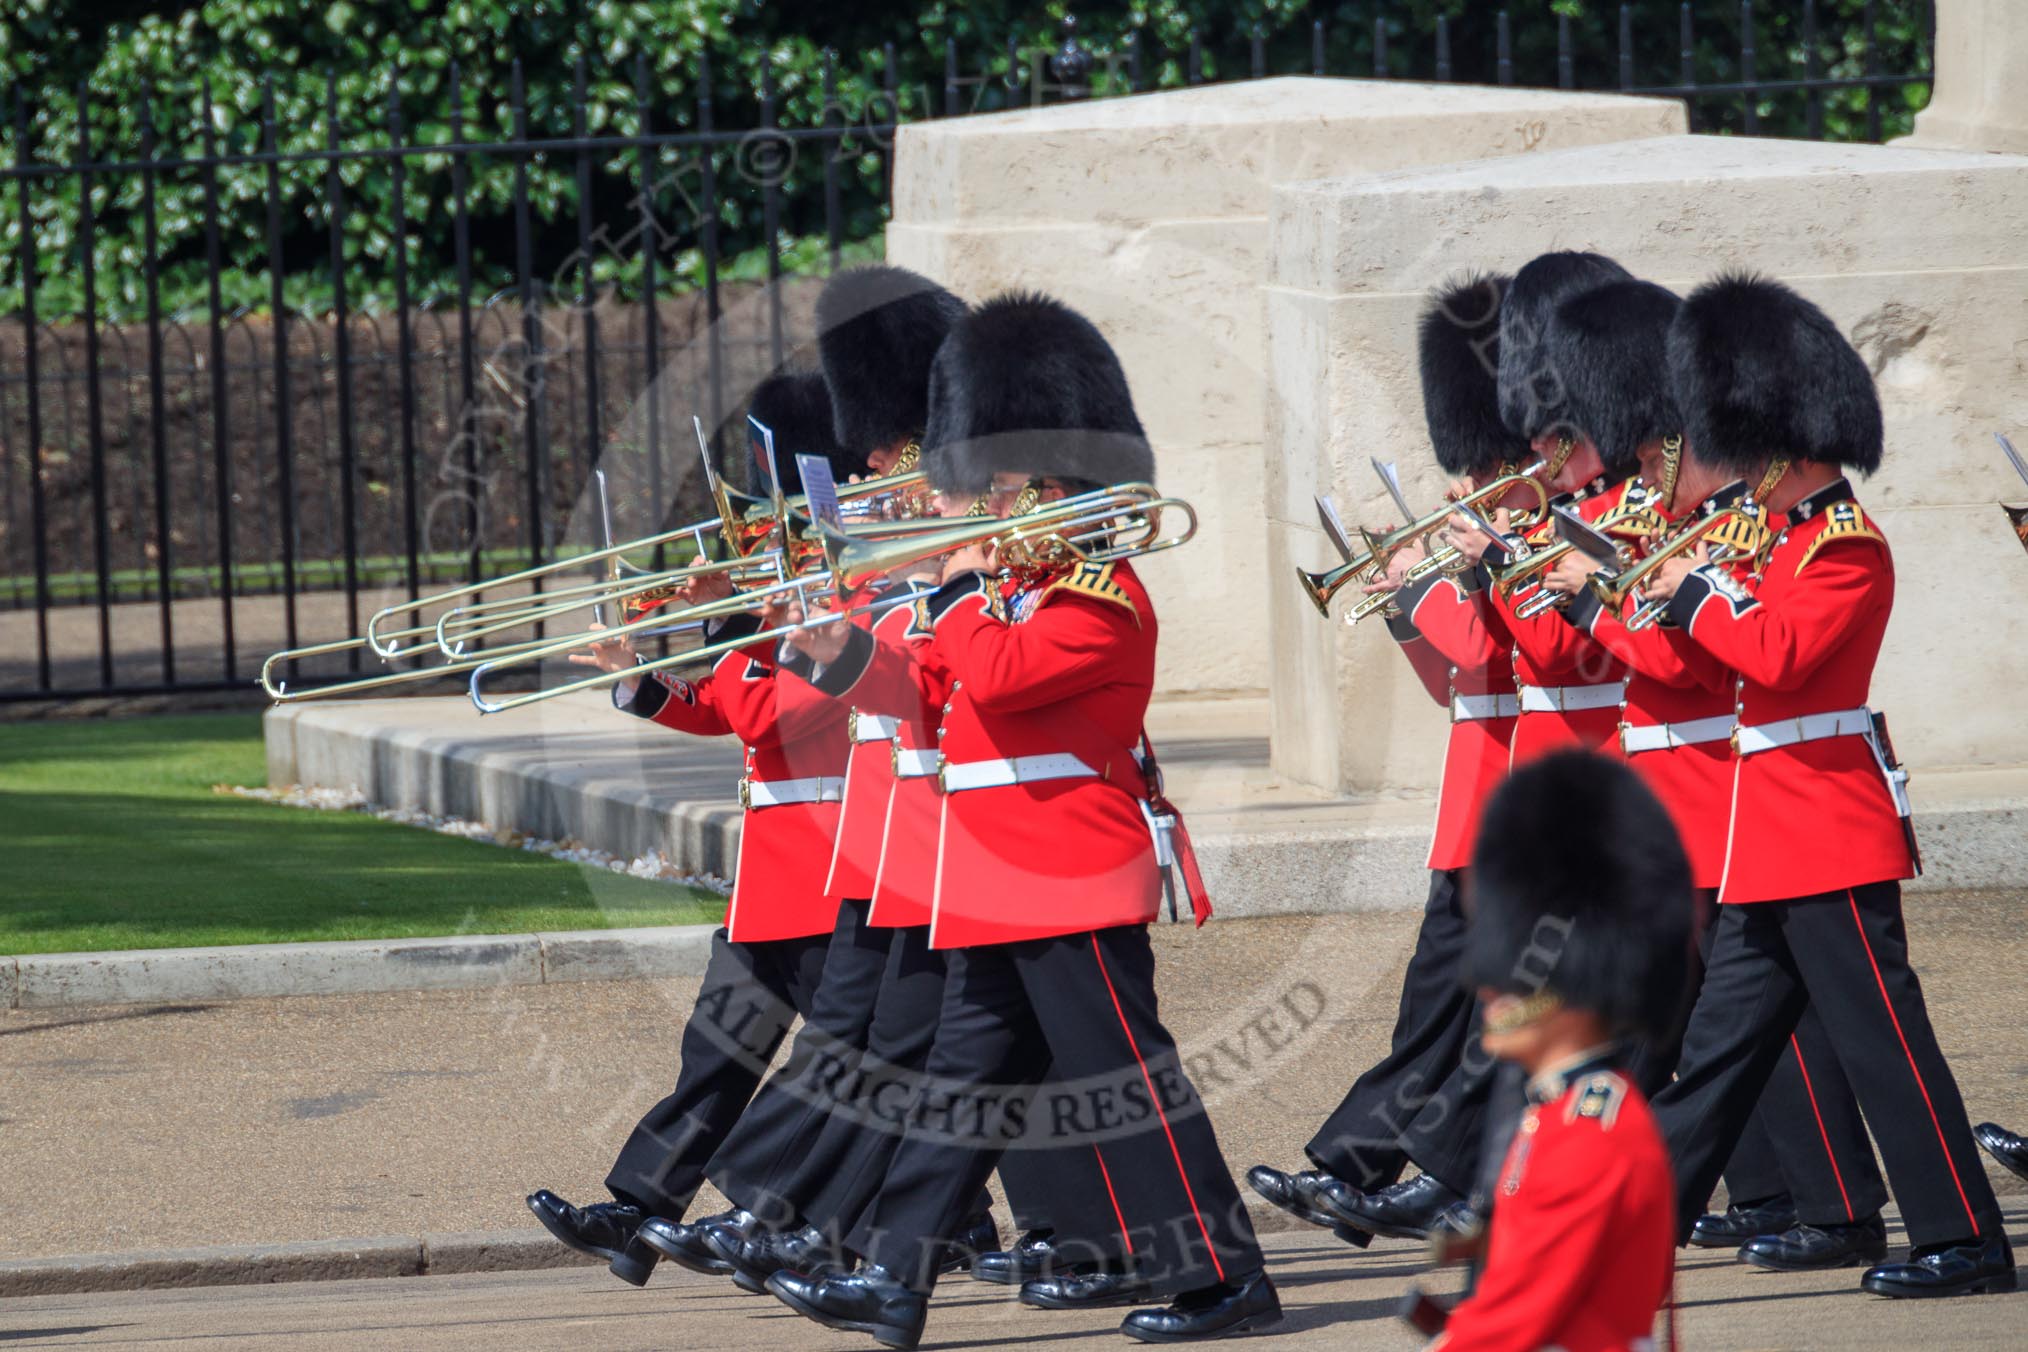 Musicians of the Band of the Irish Guards marching past the Guards Memorial during Trooping the Colour 2018, The Queen's Birthday Parade at Horse Guards Parade, Westminster, London, 9 June 2018, 10:28.